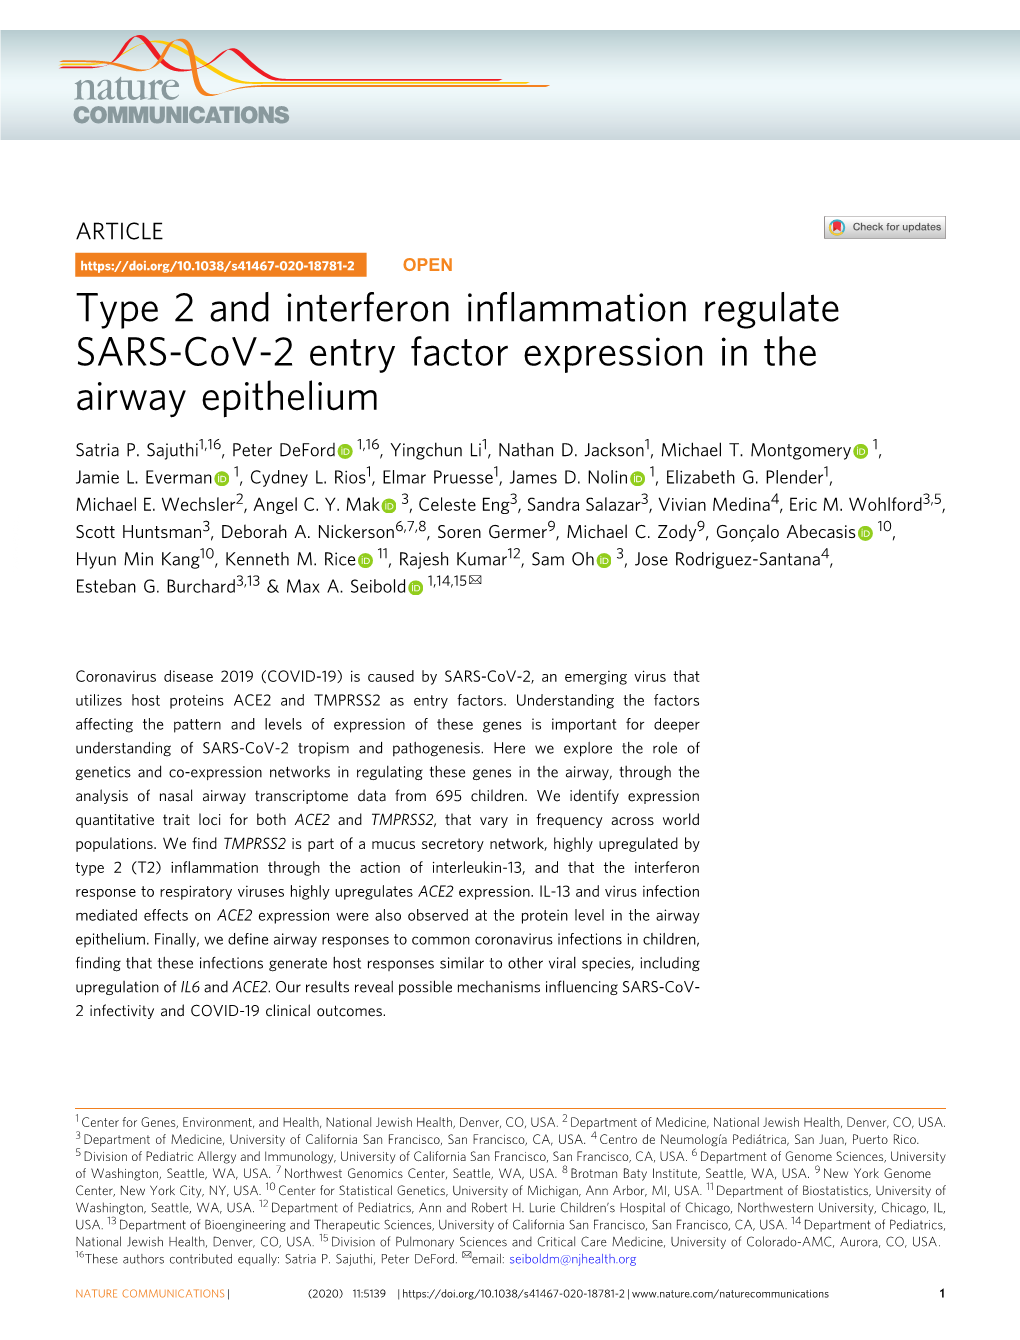 Type 2 and Interferon Inflammation Regulate SARS-Cov-2 Entry Factor